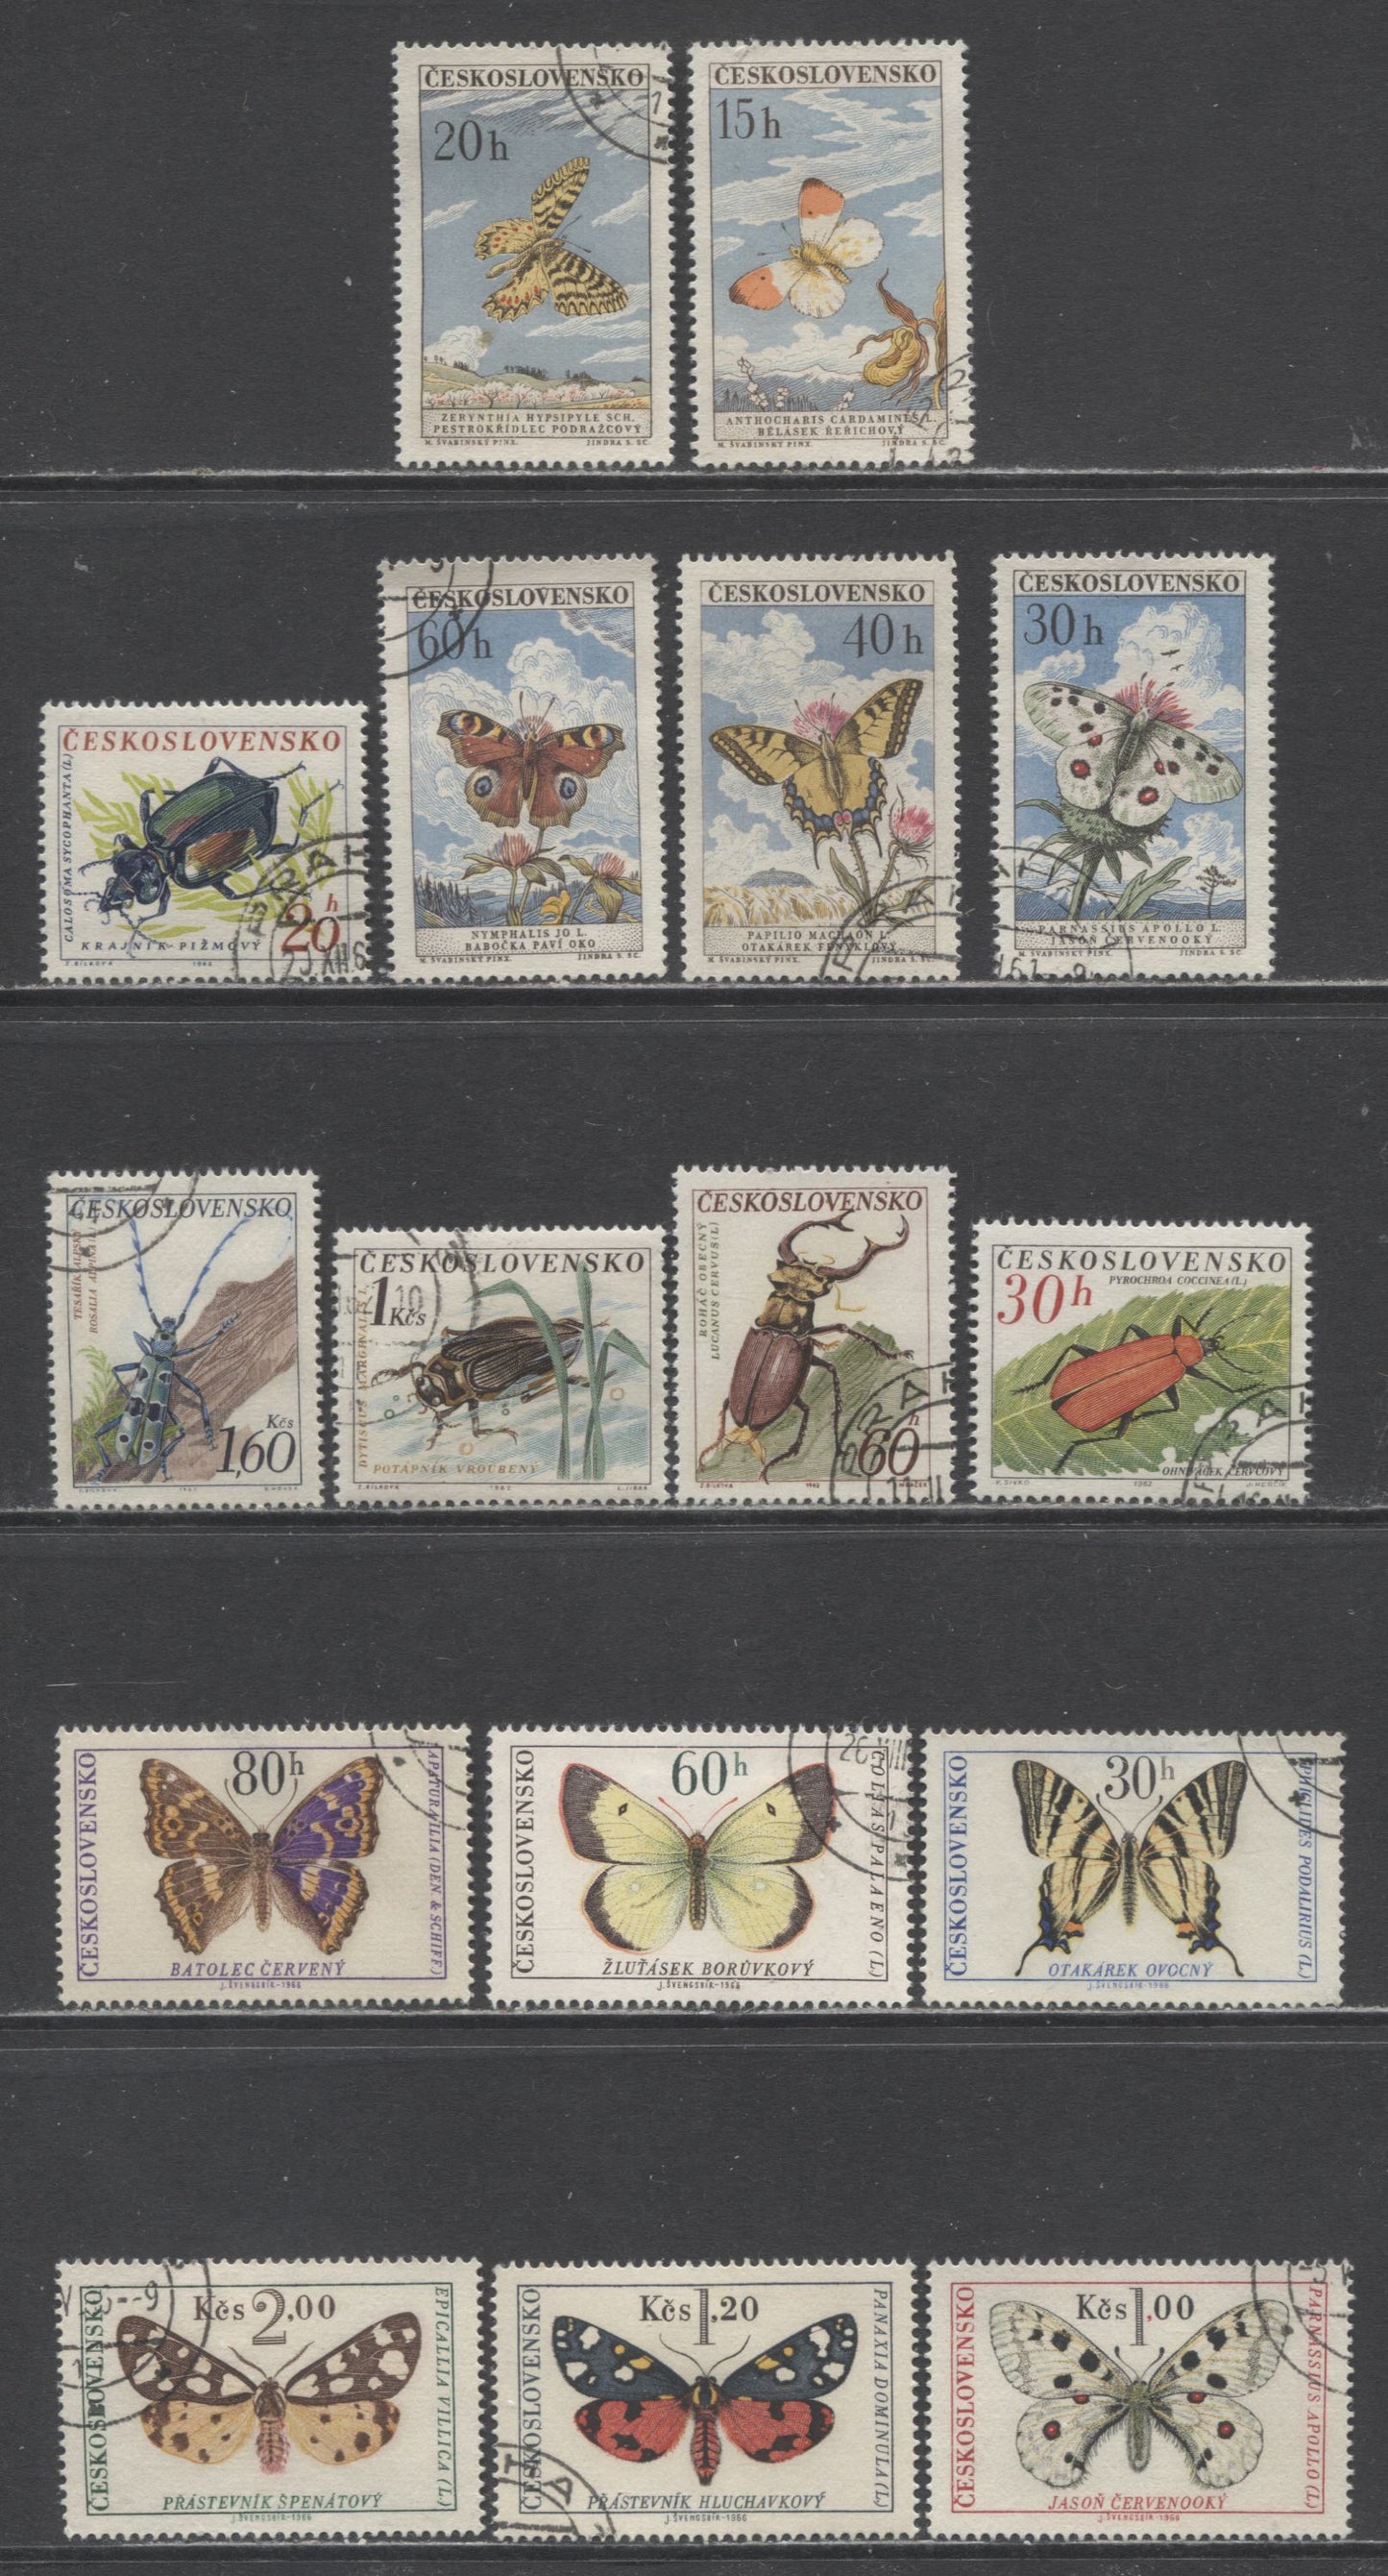 Lot 195 Czechoslovakia SC#1082/1396 1961-1966 Butterfly & Ground Beetle Issues, 15 Very Fine Used Singles, Click on Listing to See ALL Pictures, 2017 Scott Cat. $7.9